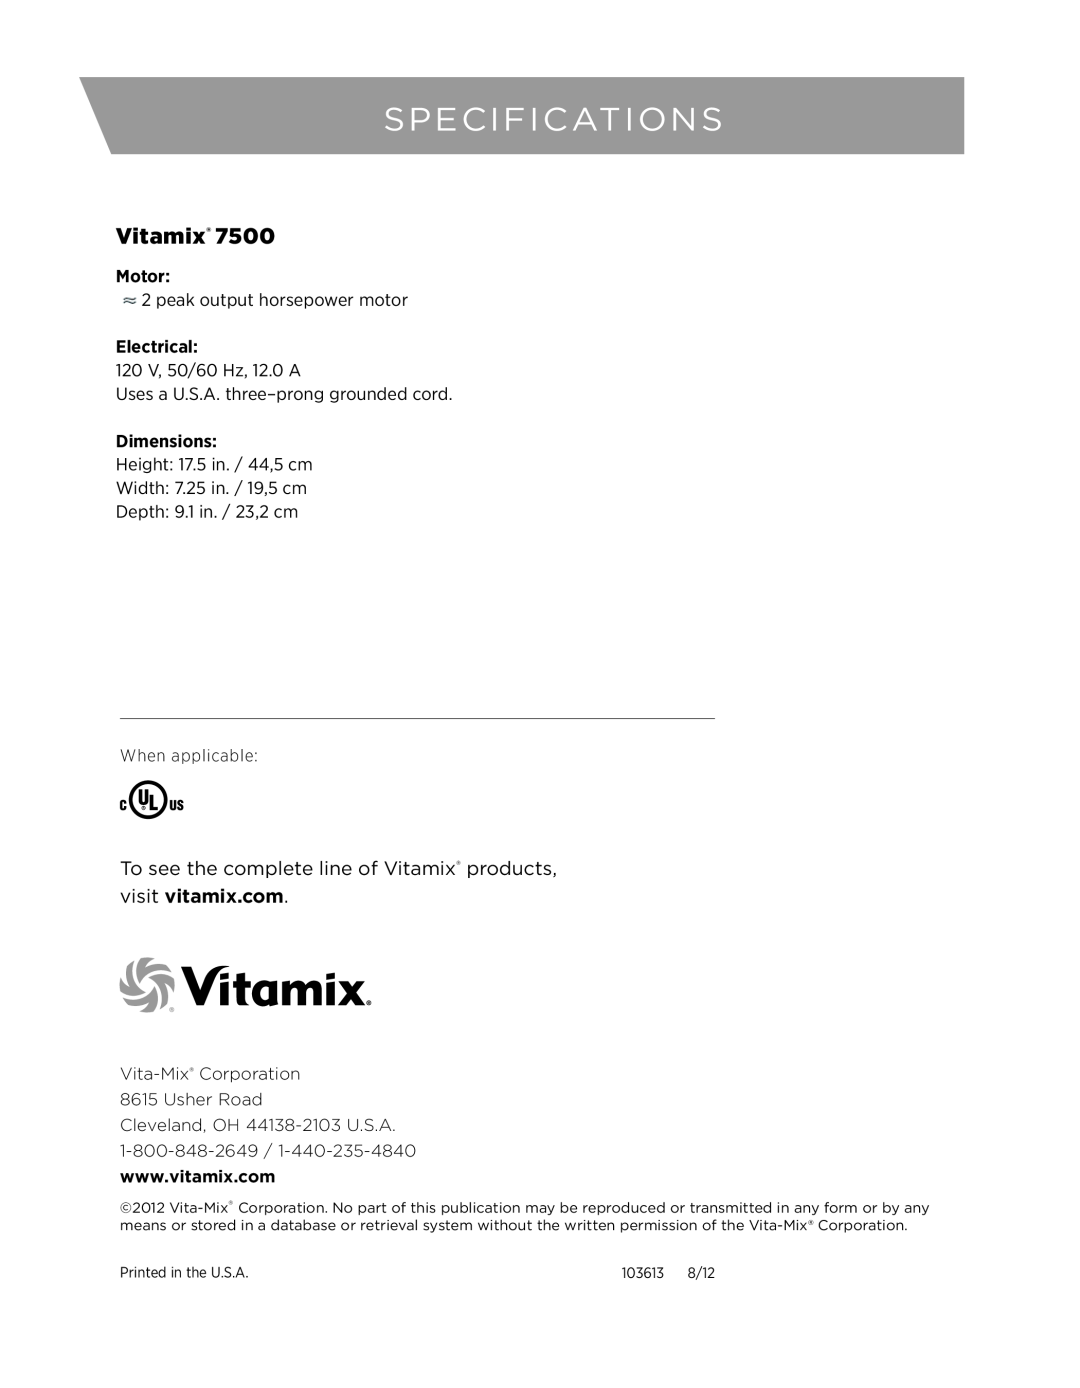 Vita-Mix 7500 Specifications, To see the complete line of Vitamix products, visit vitamix.com, Motor, Electrical 